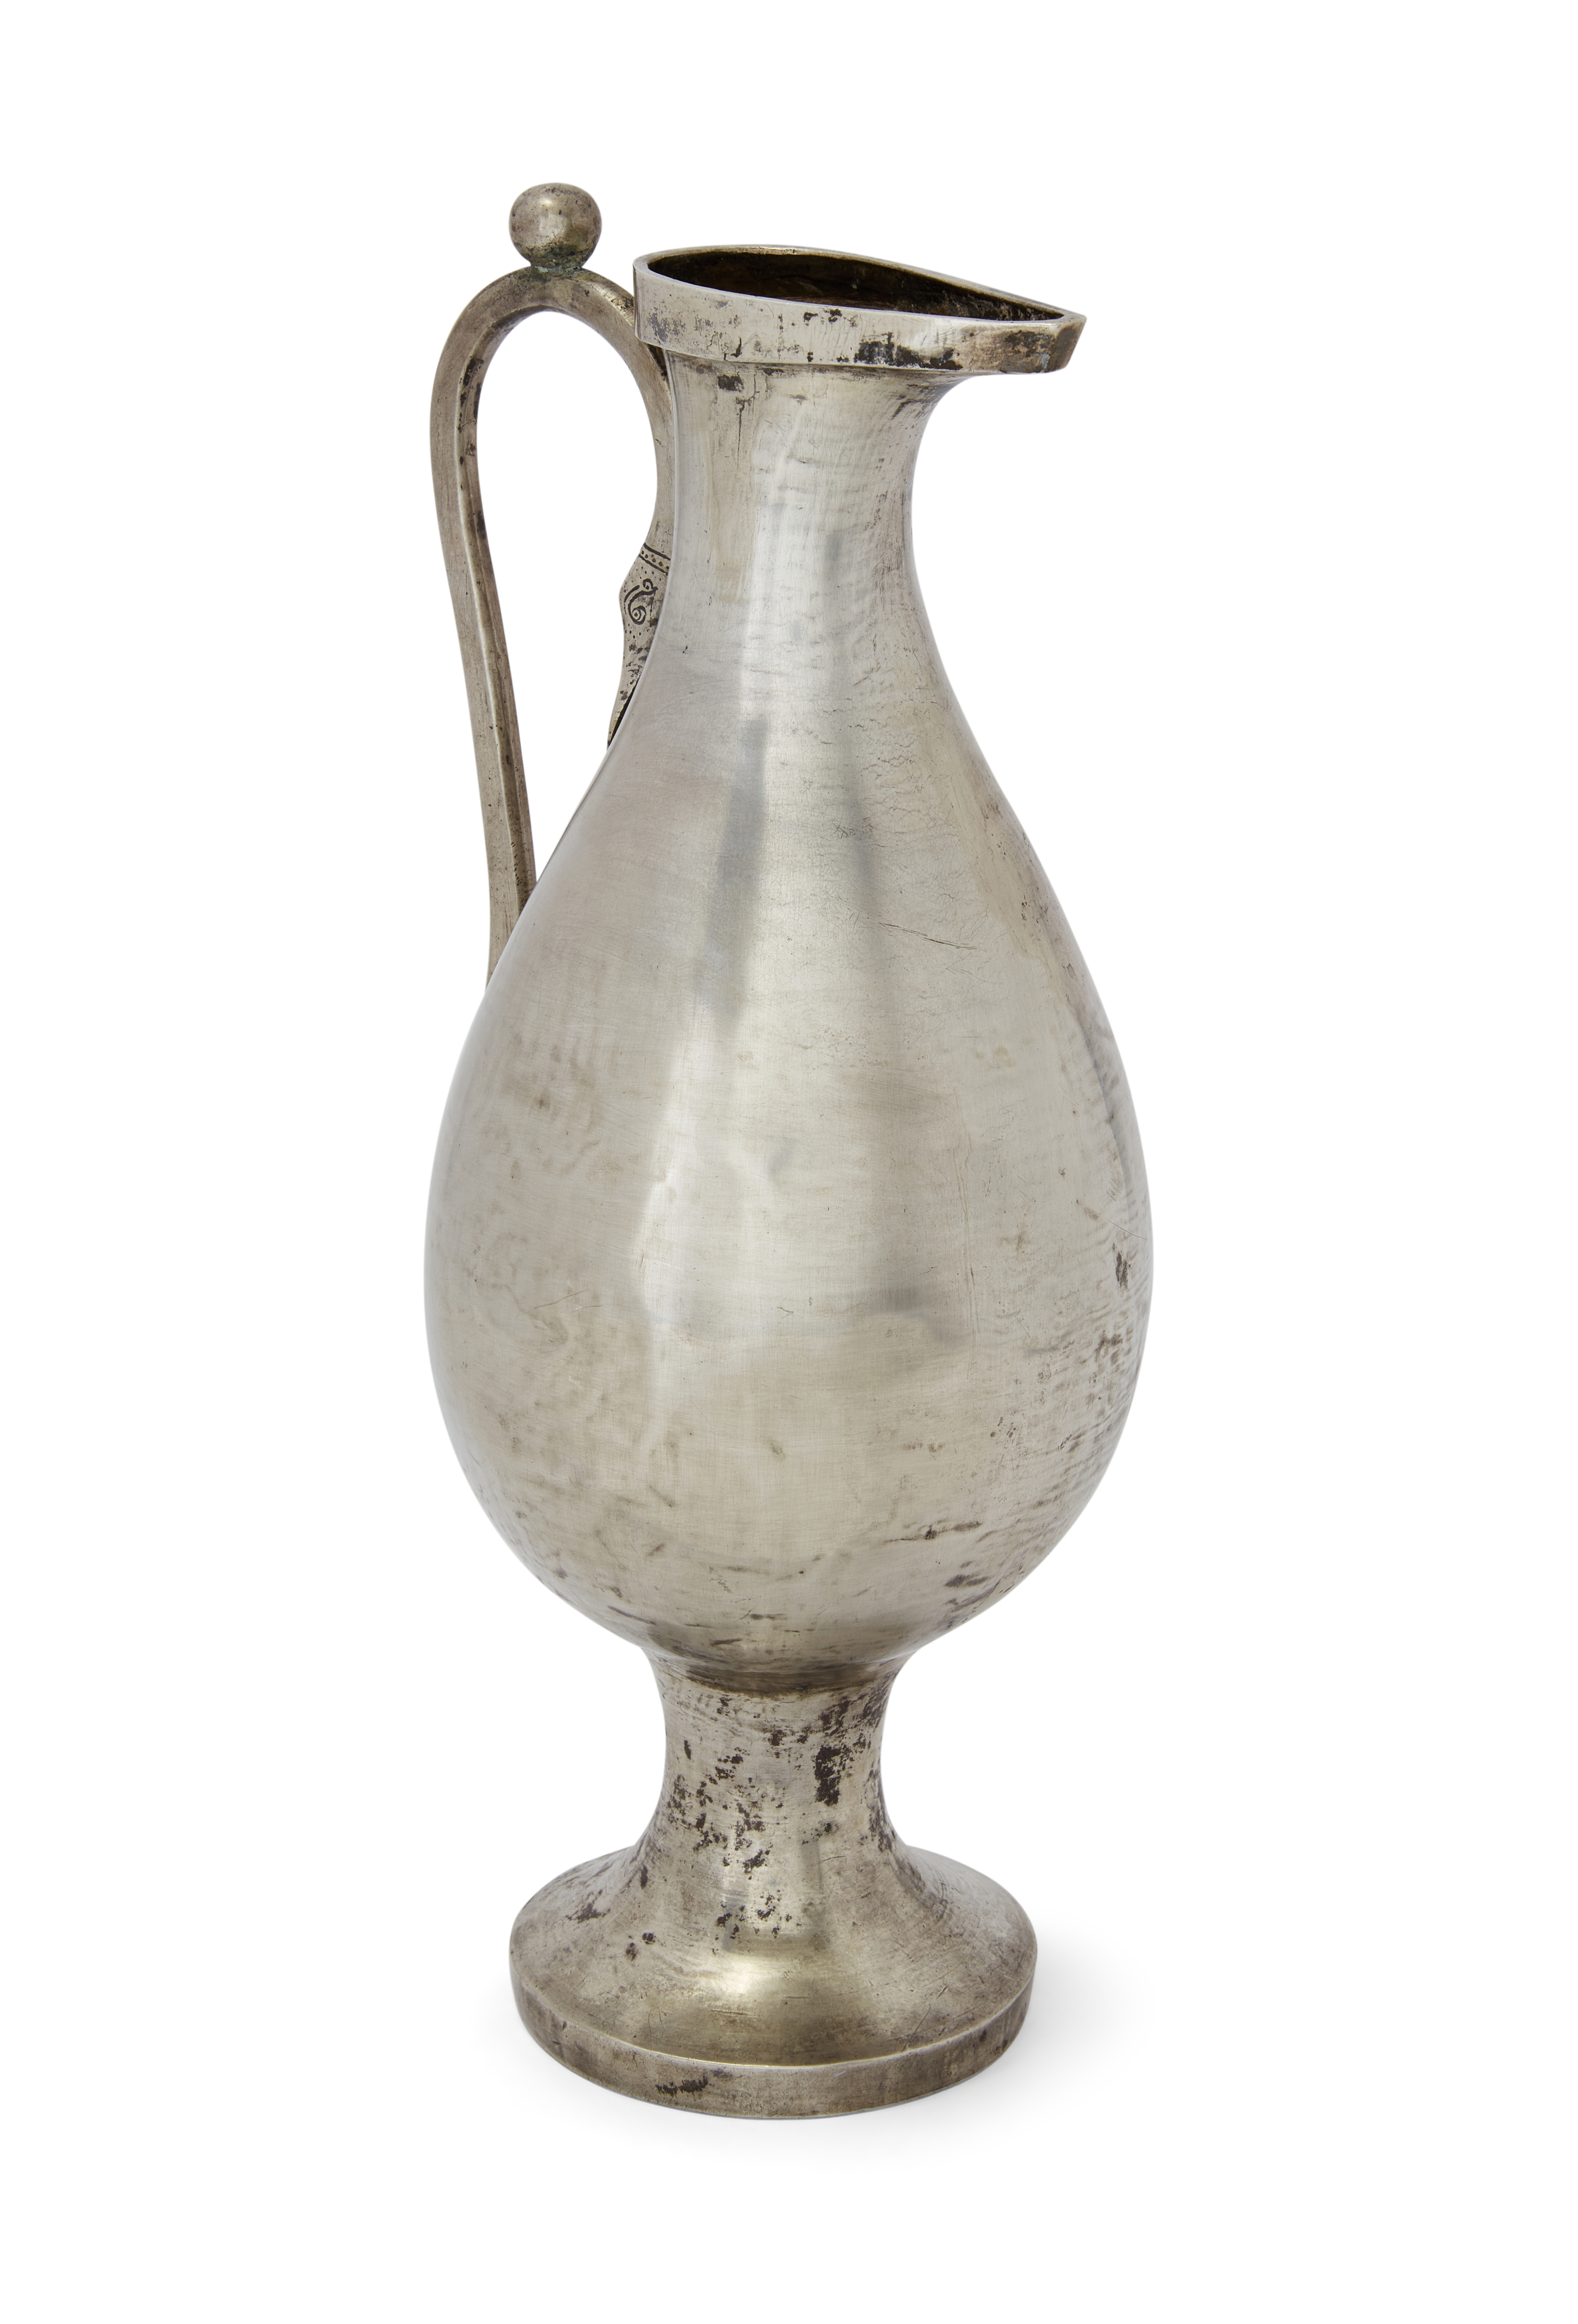 To Be Sold With No Reserve A Sasanian or early Islamic silver ewer, 6th-7th century, of bulbou... - Image 2 of 2